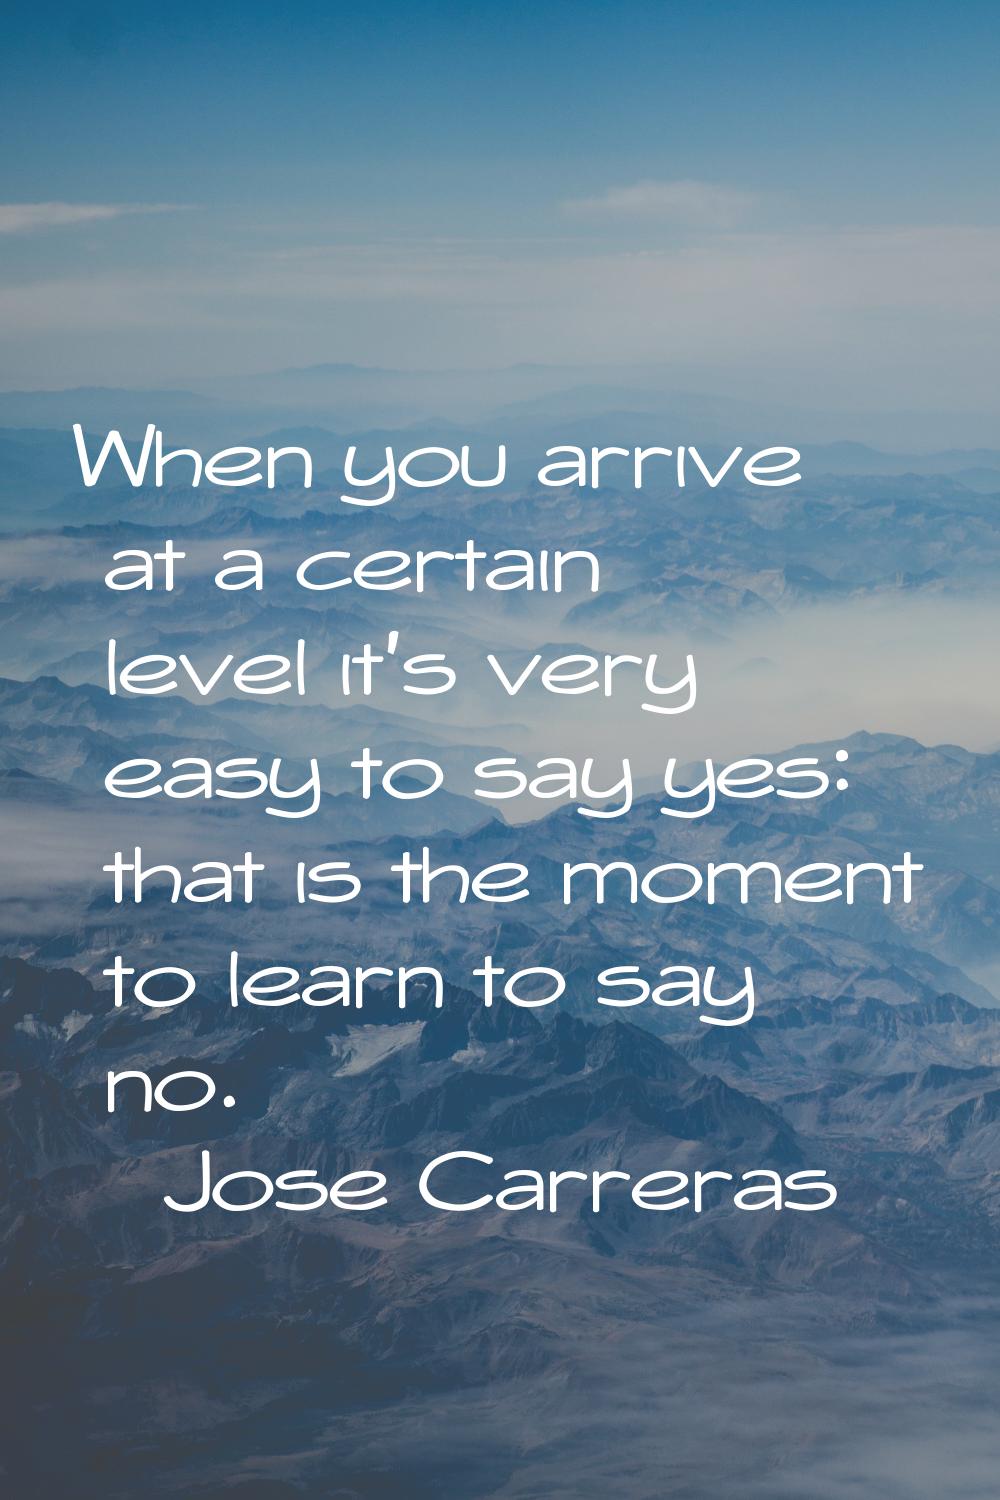 When you arrive at a certain level it's very easy to say yes: that is the moment to learn to say no